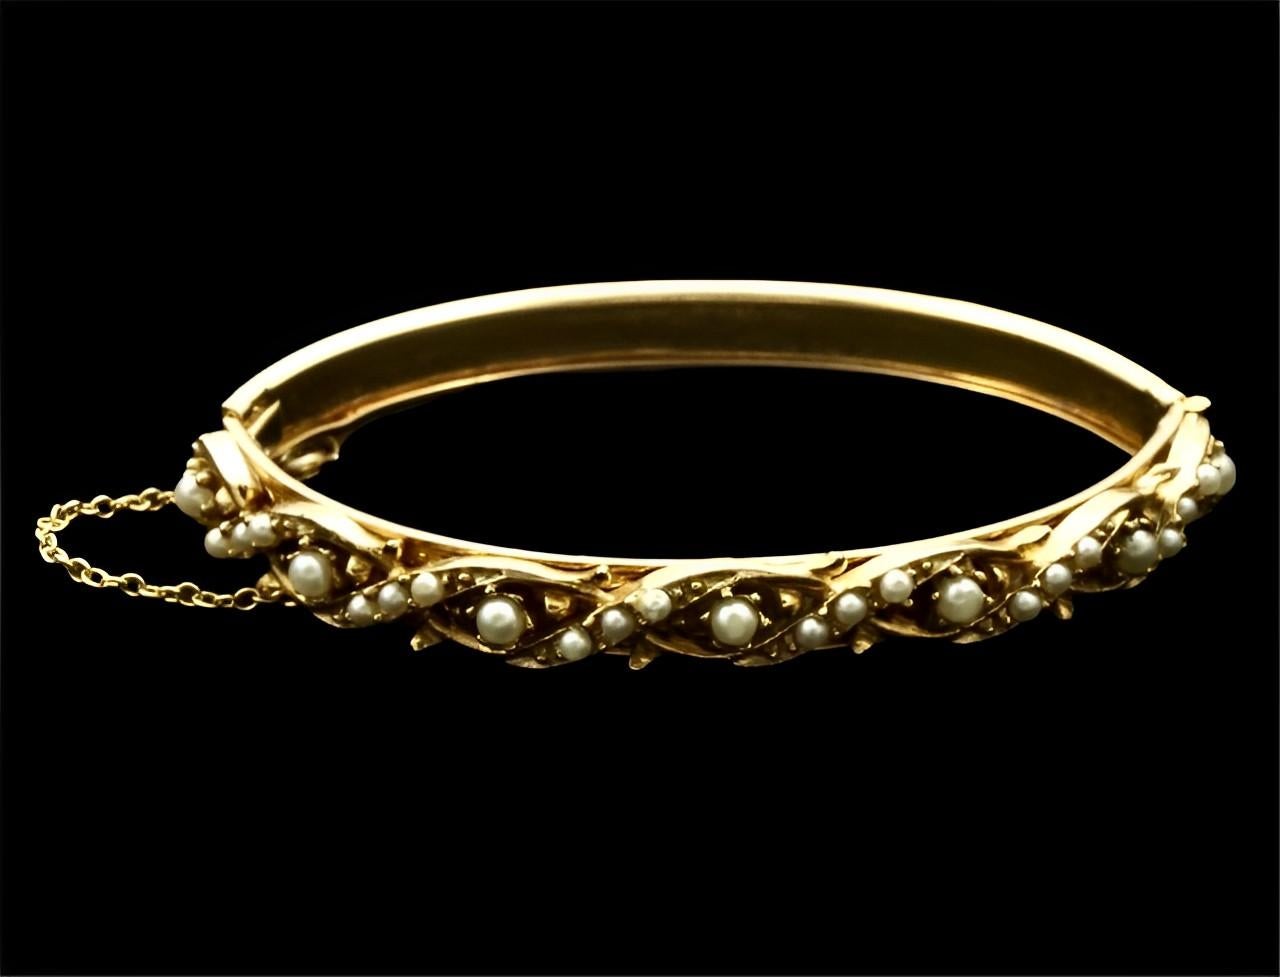 Gold Plated and Faux Pearl Bangle Bracelet circa 1950s For Sale 3